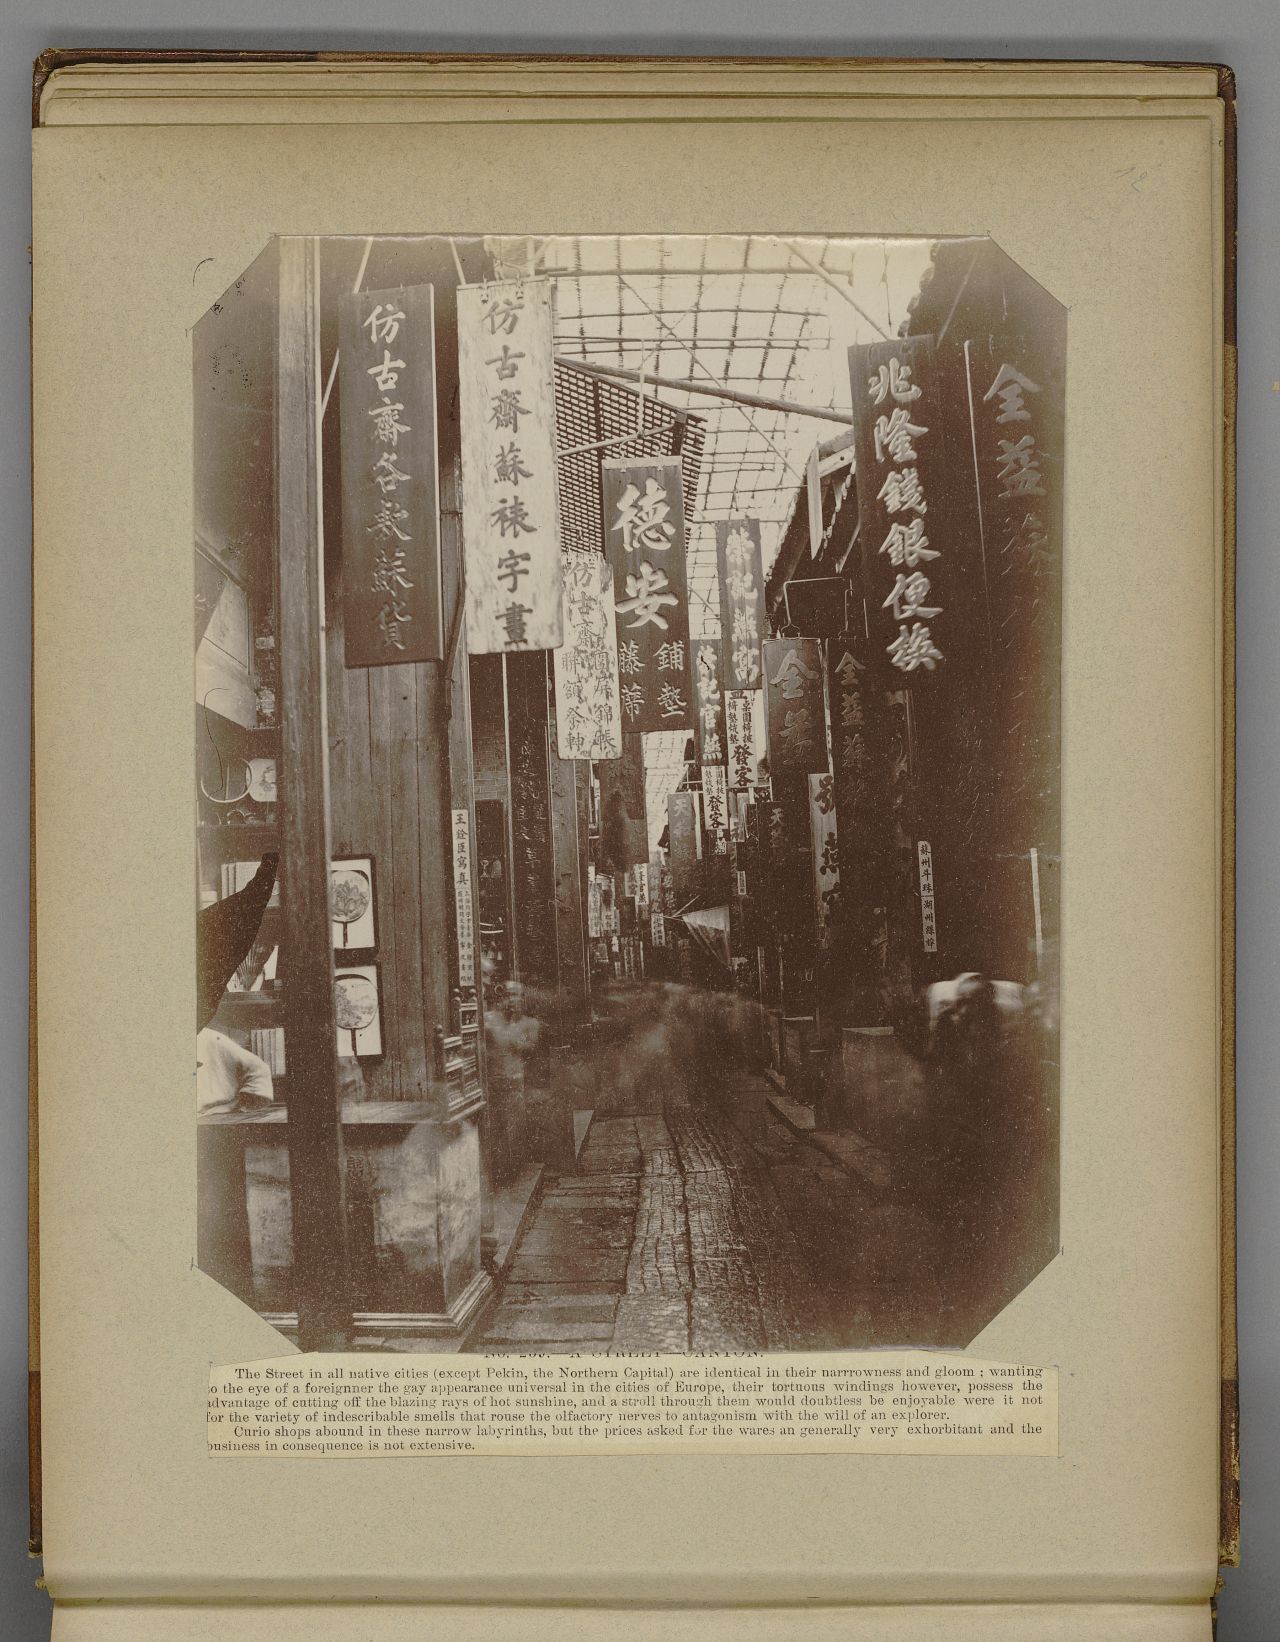 The long exposure times of early cameras made it difficult to capture street scenes.